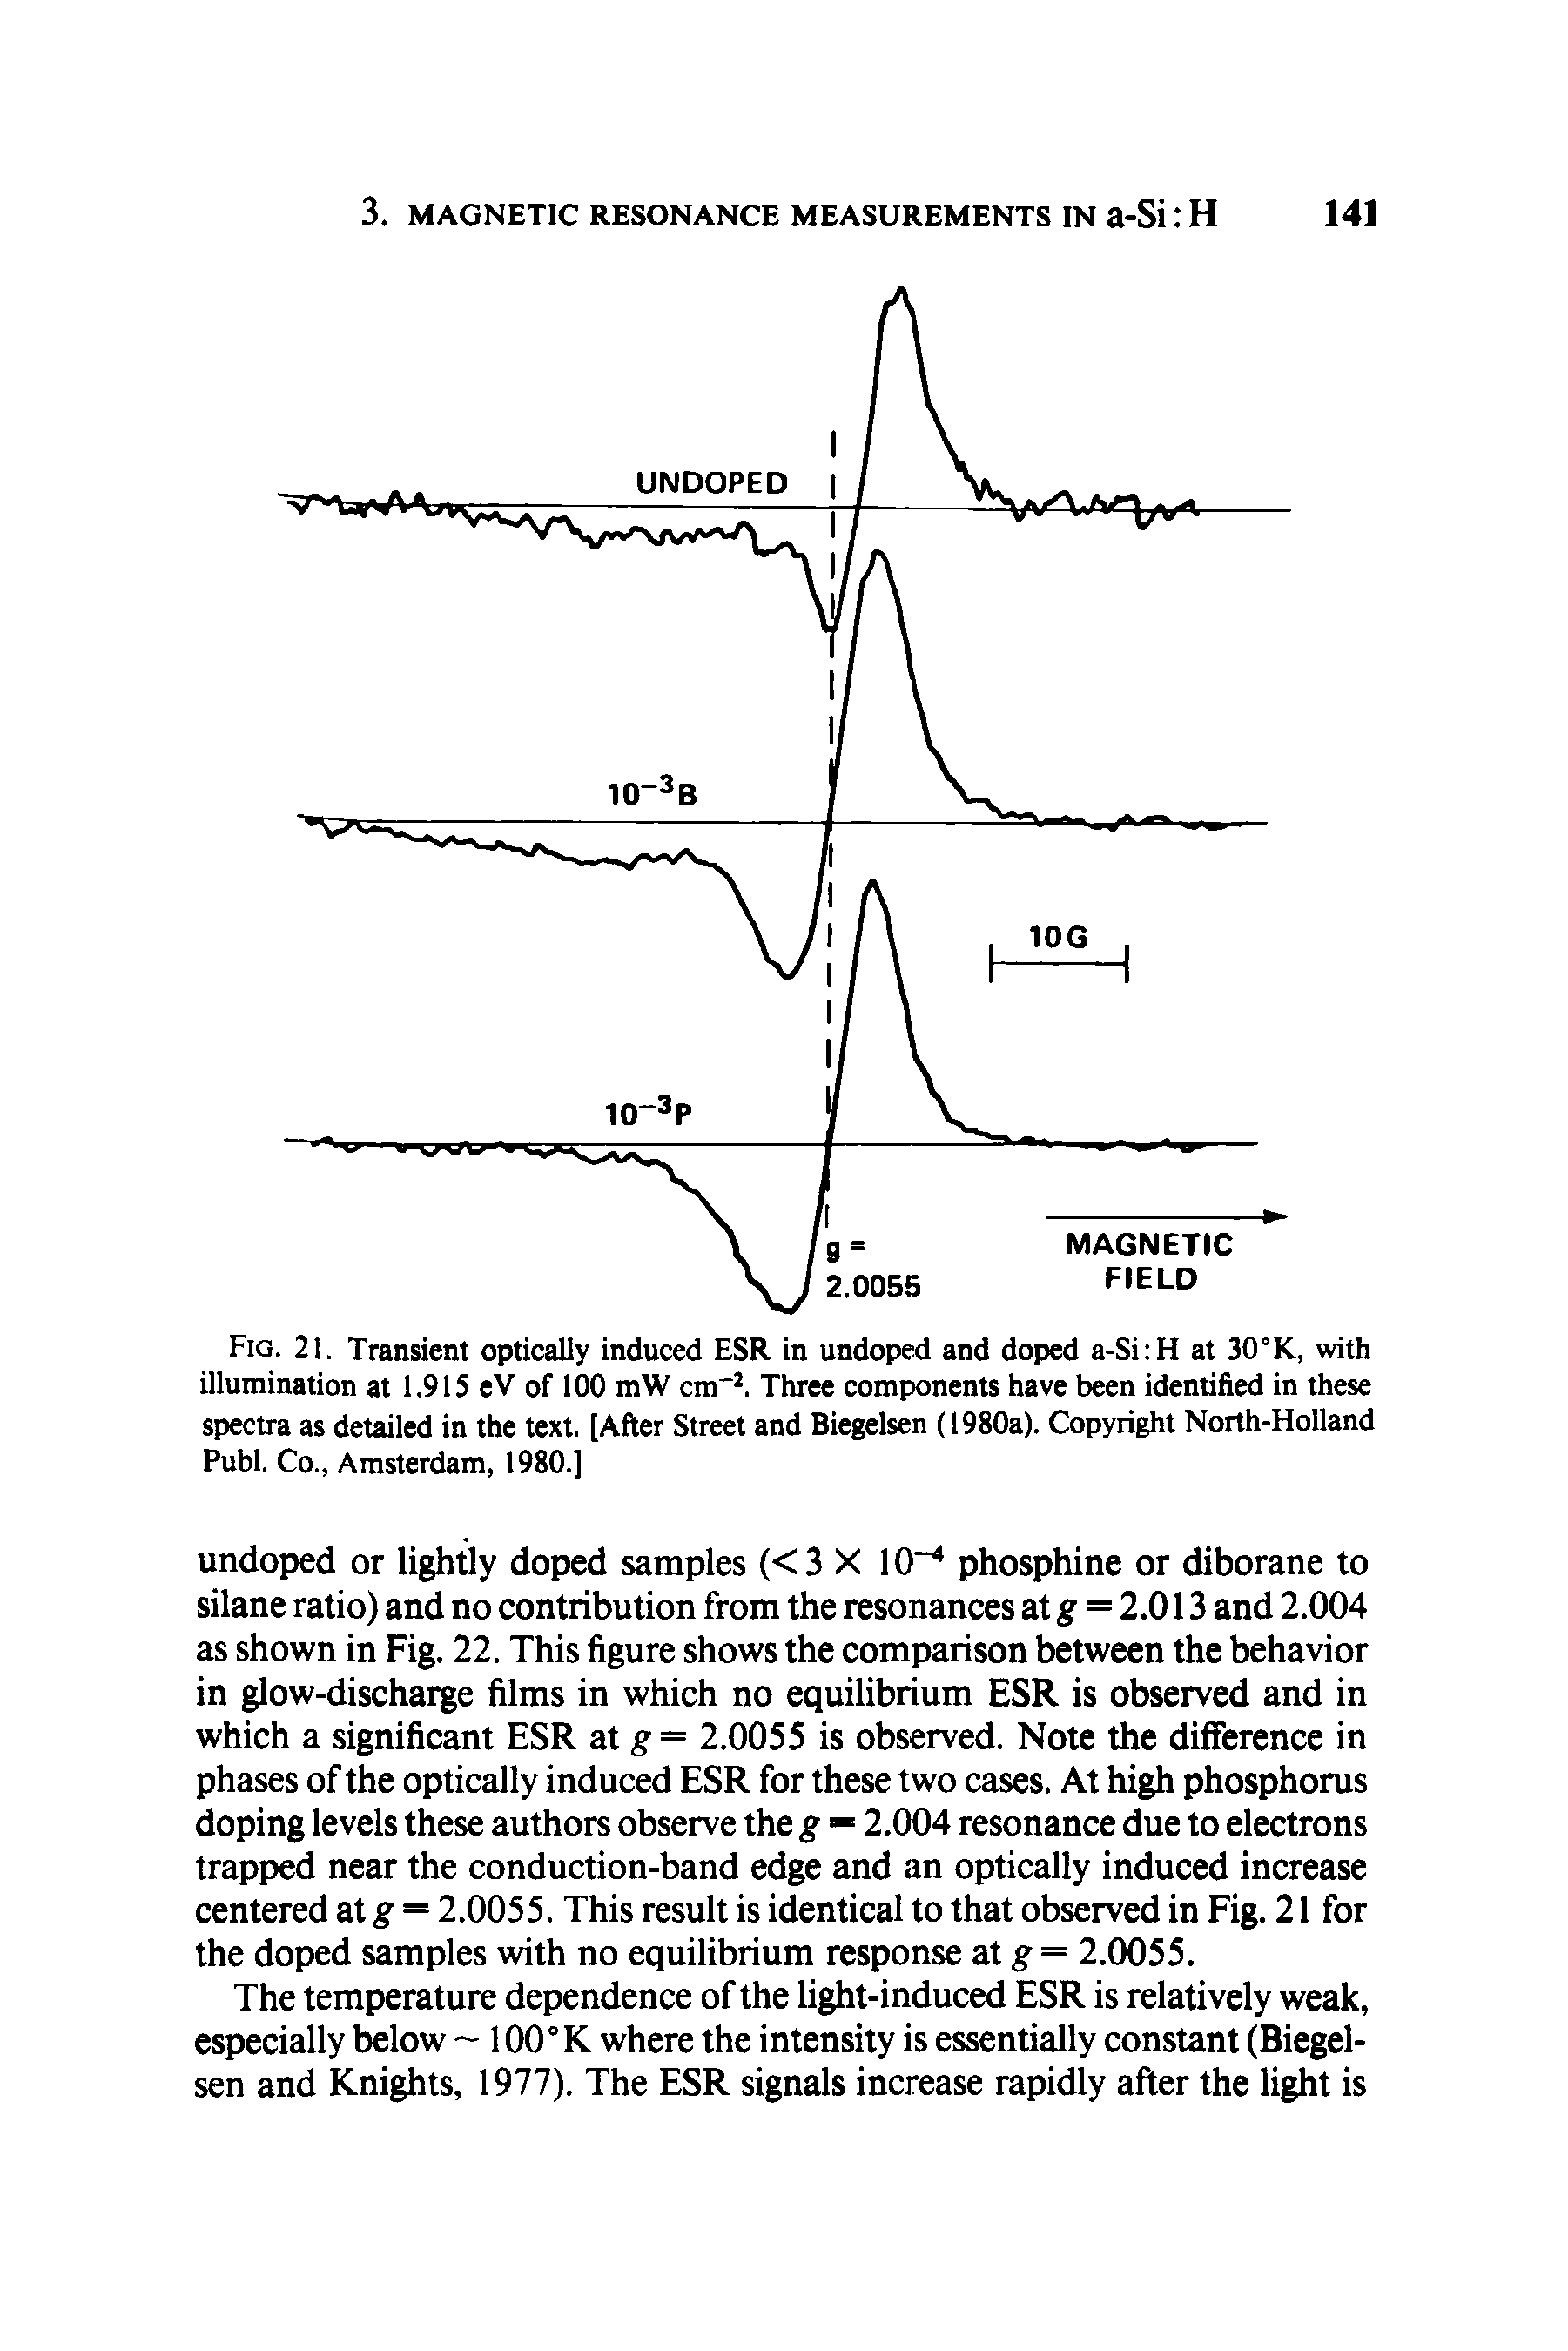 Fig. 21. Transient optically induced ESR in undoped and doped a-Si H at 30°K, with illumination at 1.915 eV of 100 mW cm . Three components have been identified in these spectra as detailed in the text. [After Street and Biegelsen (1980a). Copyright North-Holland Publ. Co., Amsterdam, 1980.]...